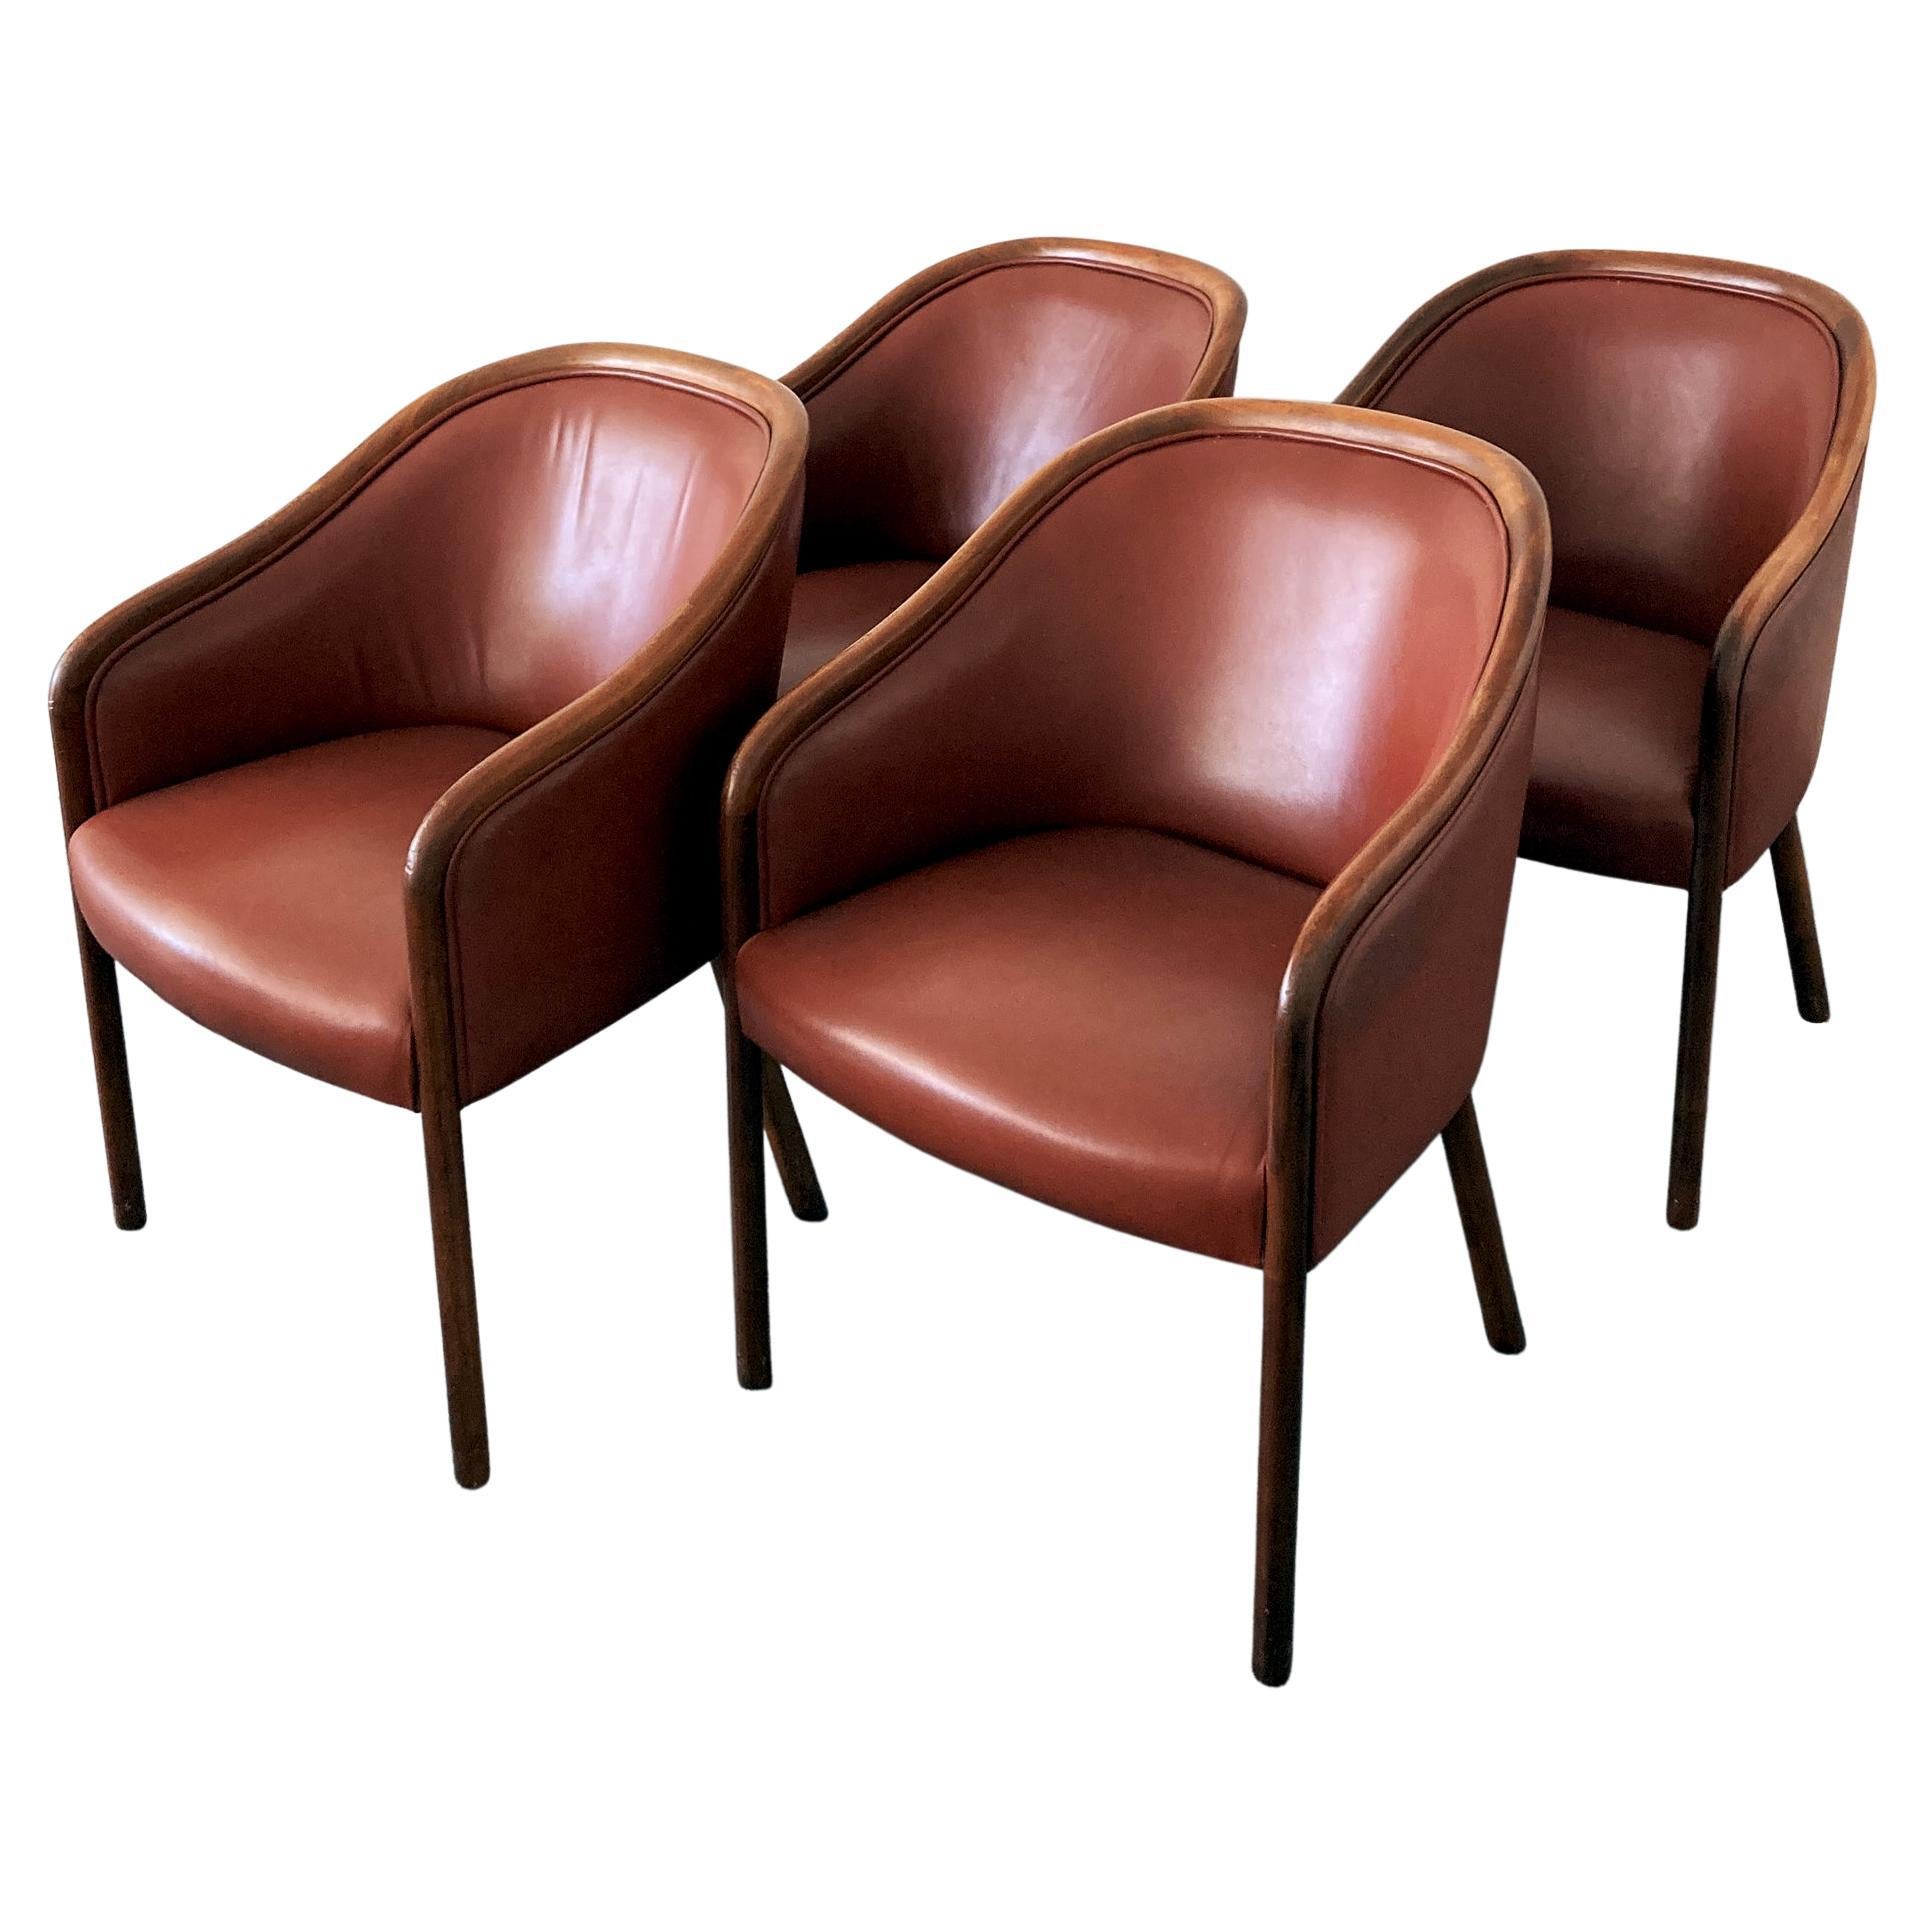 Designed by Ward Bennett for Brickel Associates, elegant leather armchairs. Made from ash wood and stained in a walnut finish, upholstered in burgundy leather. Stunning set of chairs, leather is in good condition. The chairs are structurally sound